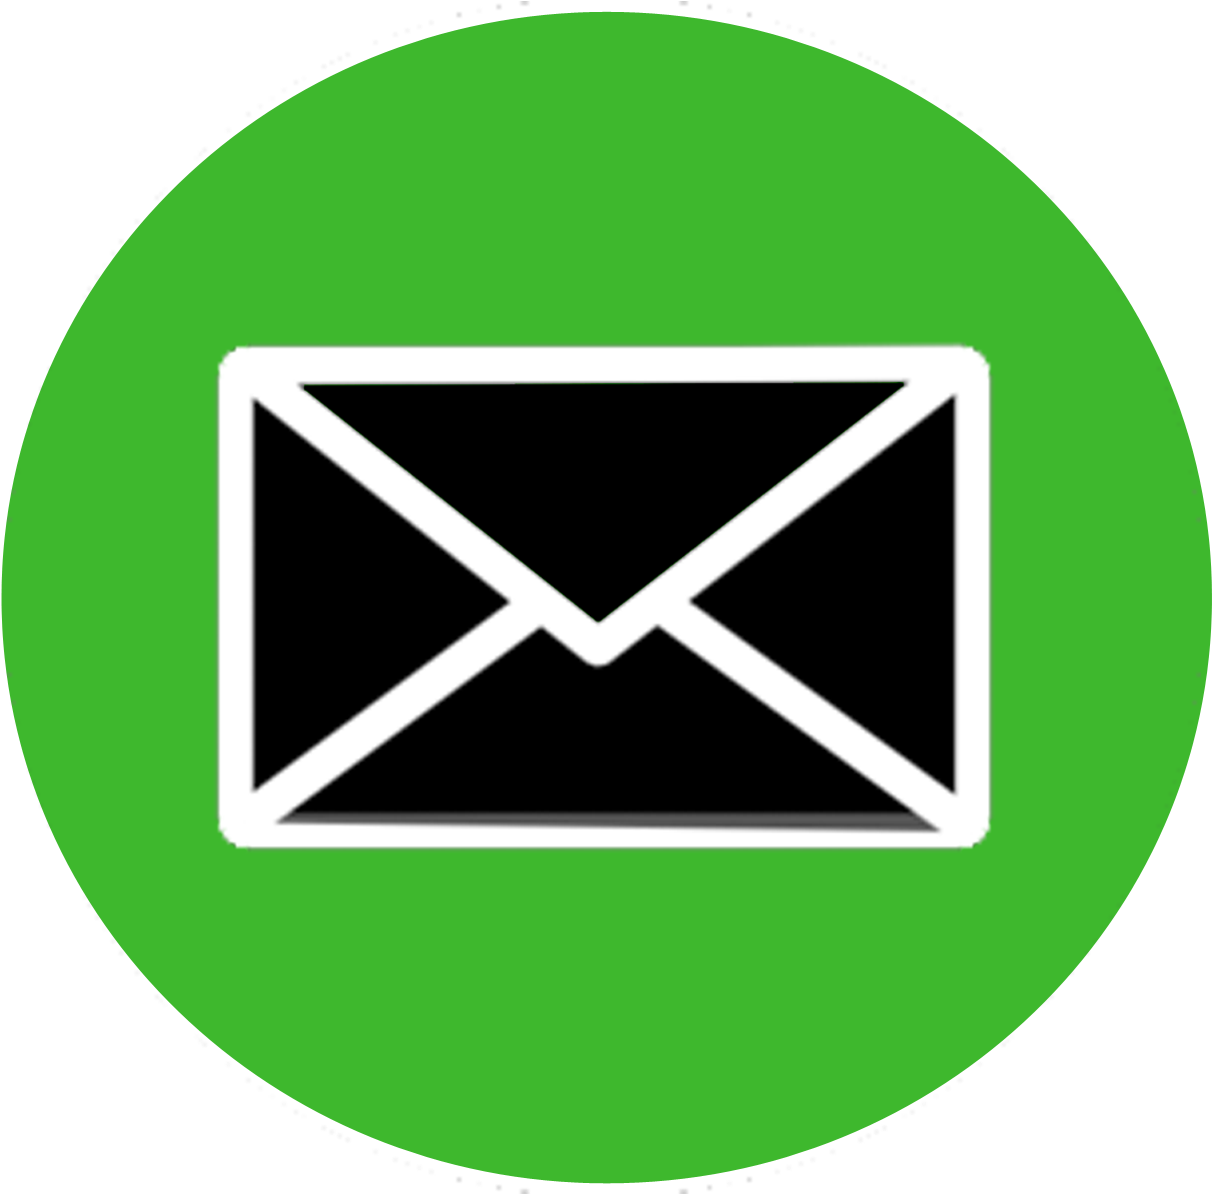 Email - Reminder Software (1573x1573)